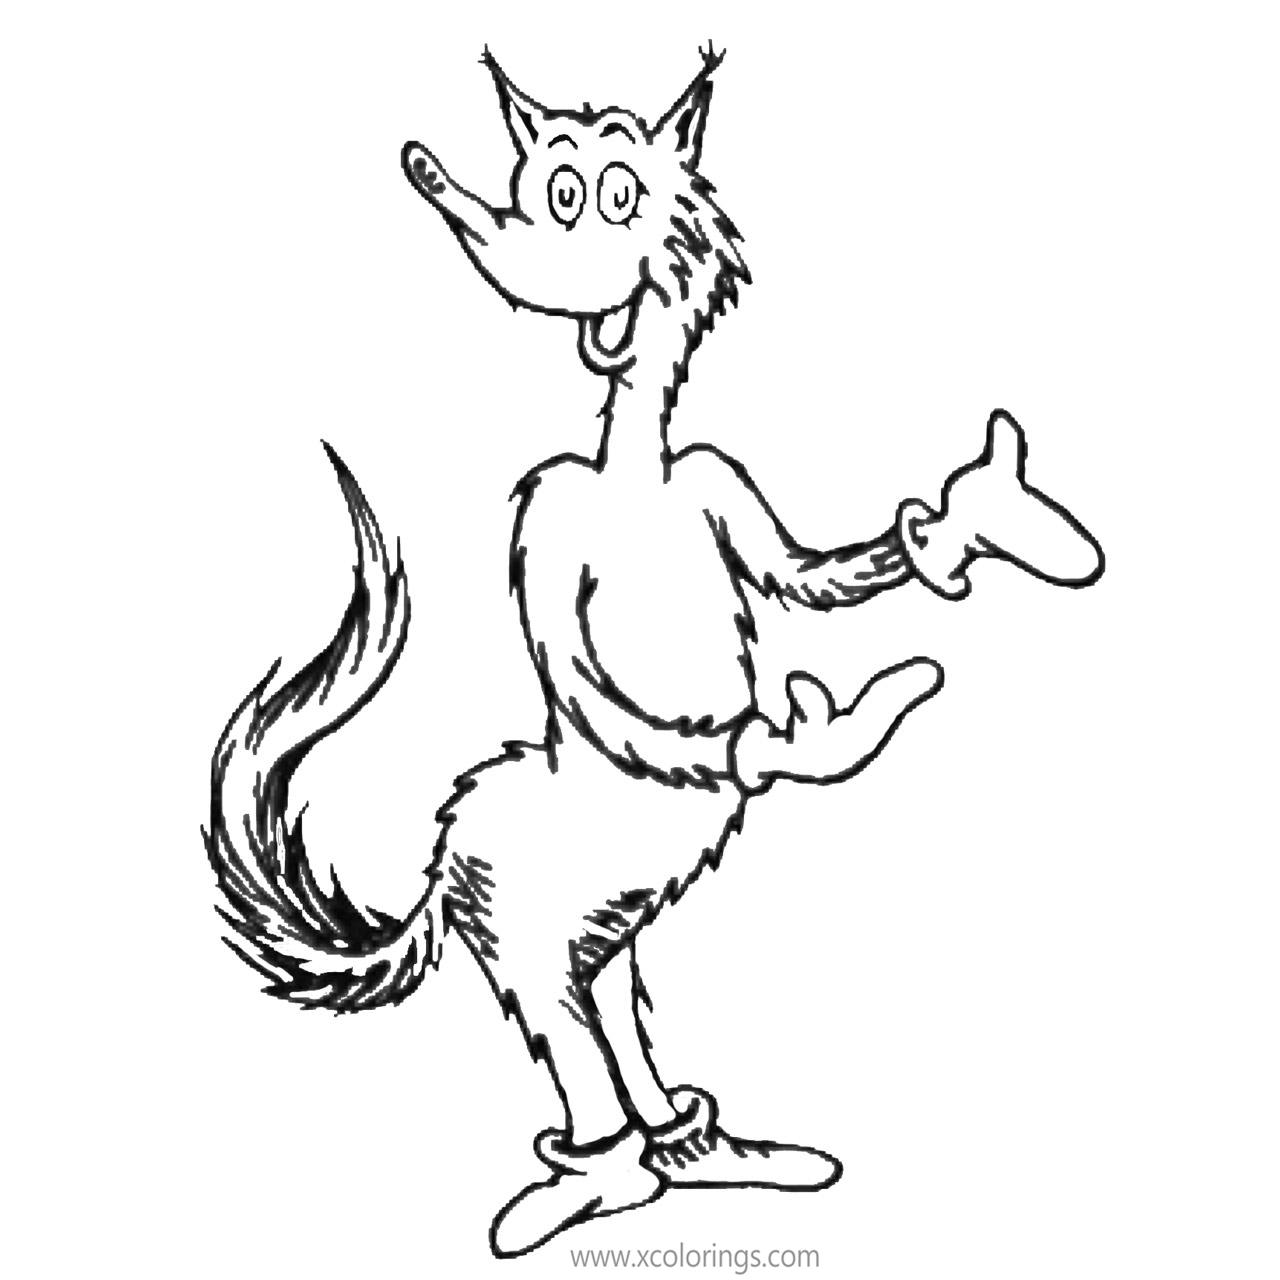 Fox in Socks Coloring Pages Printable